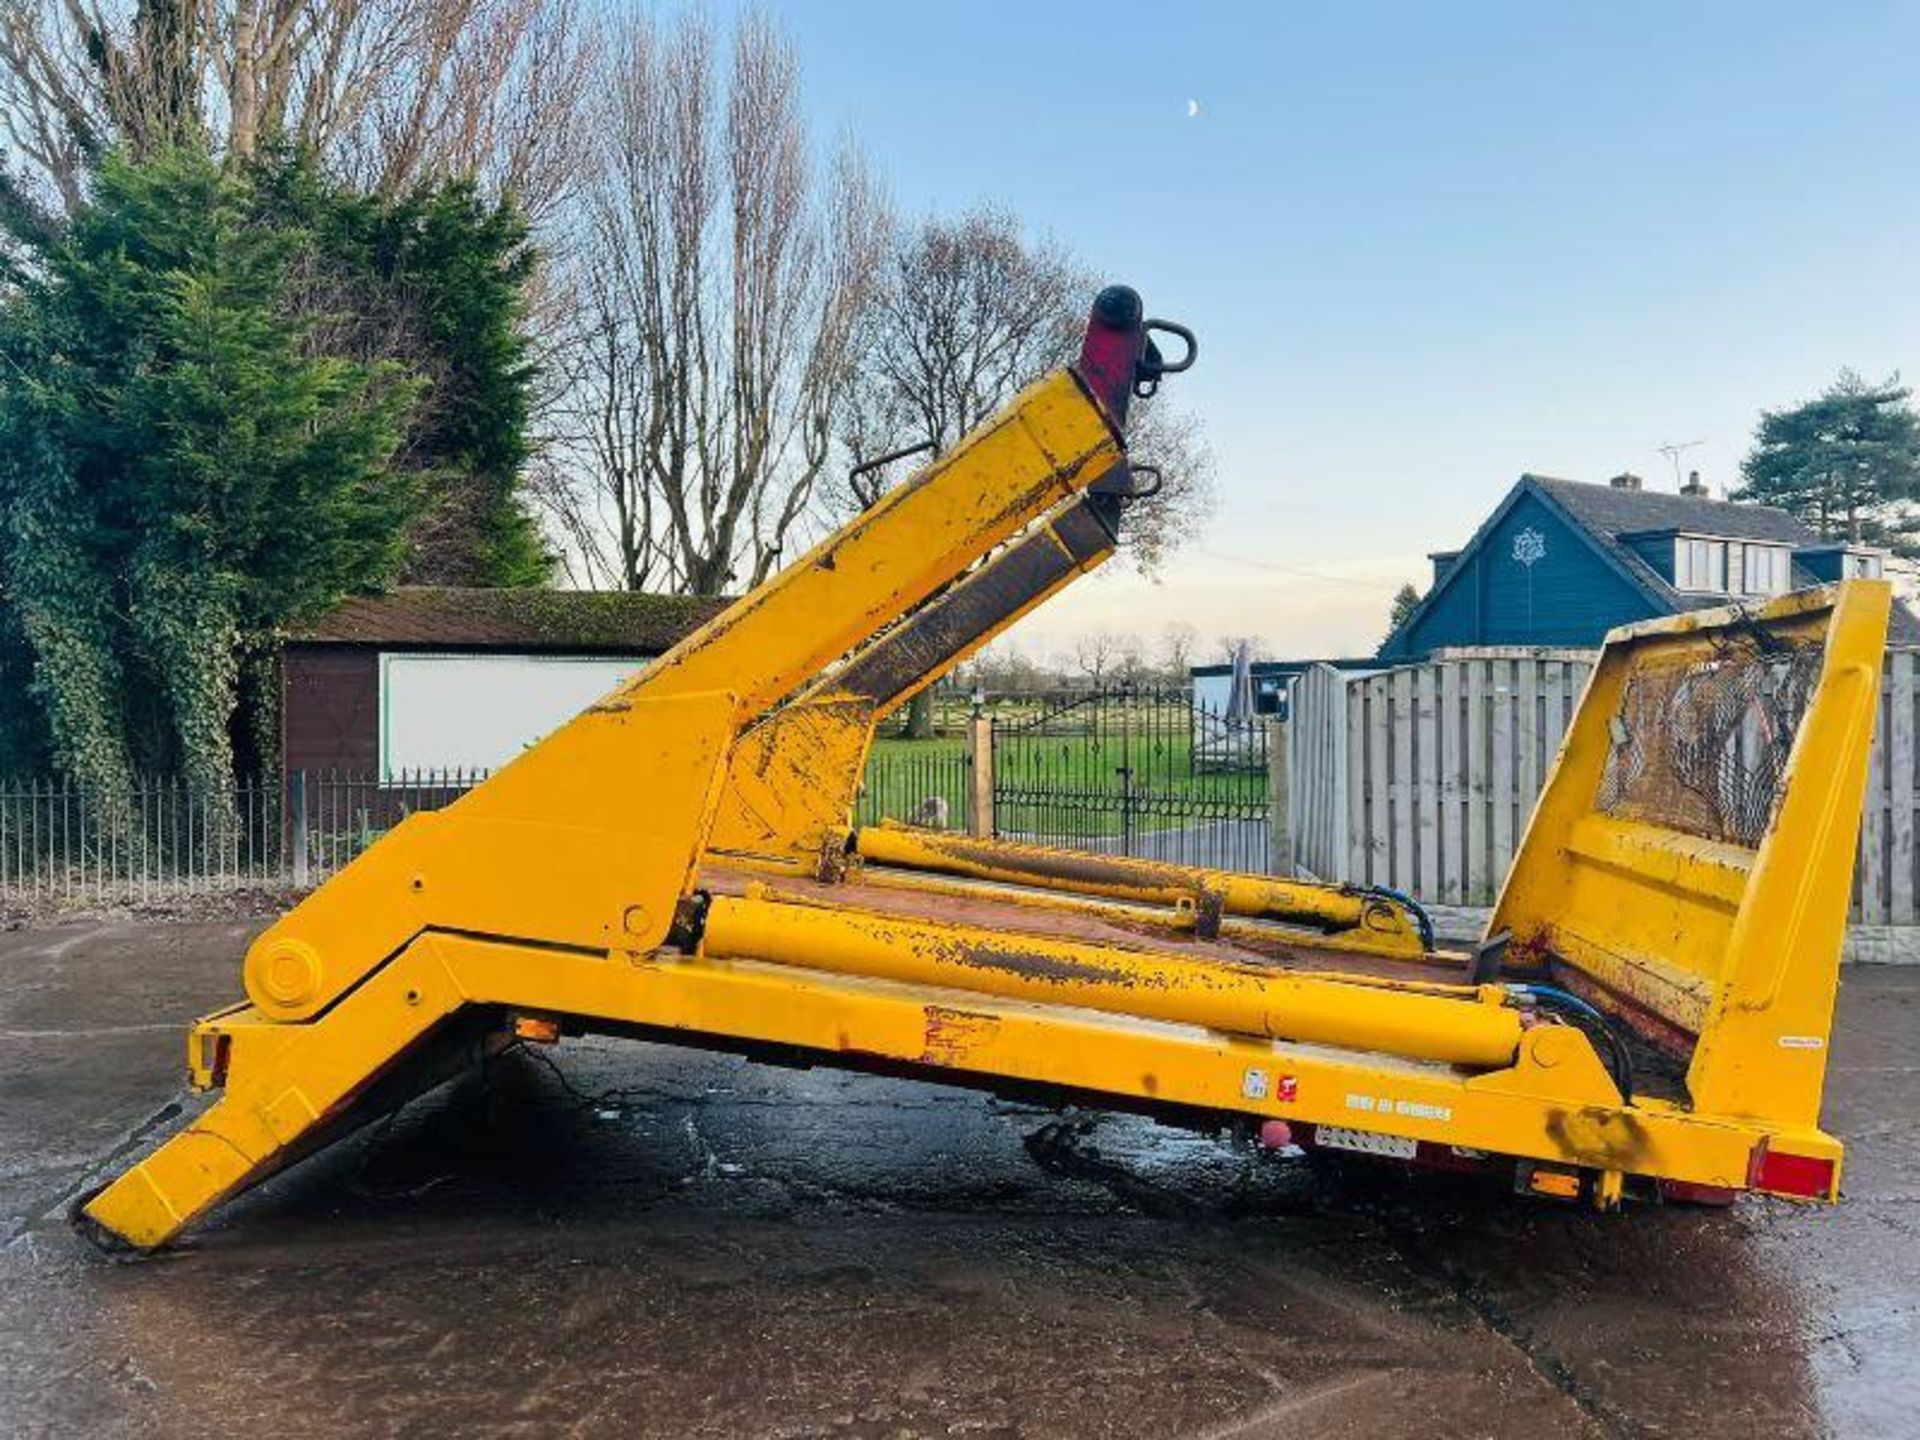 SKIP LIFTING GEAR TO SUIT LORRY